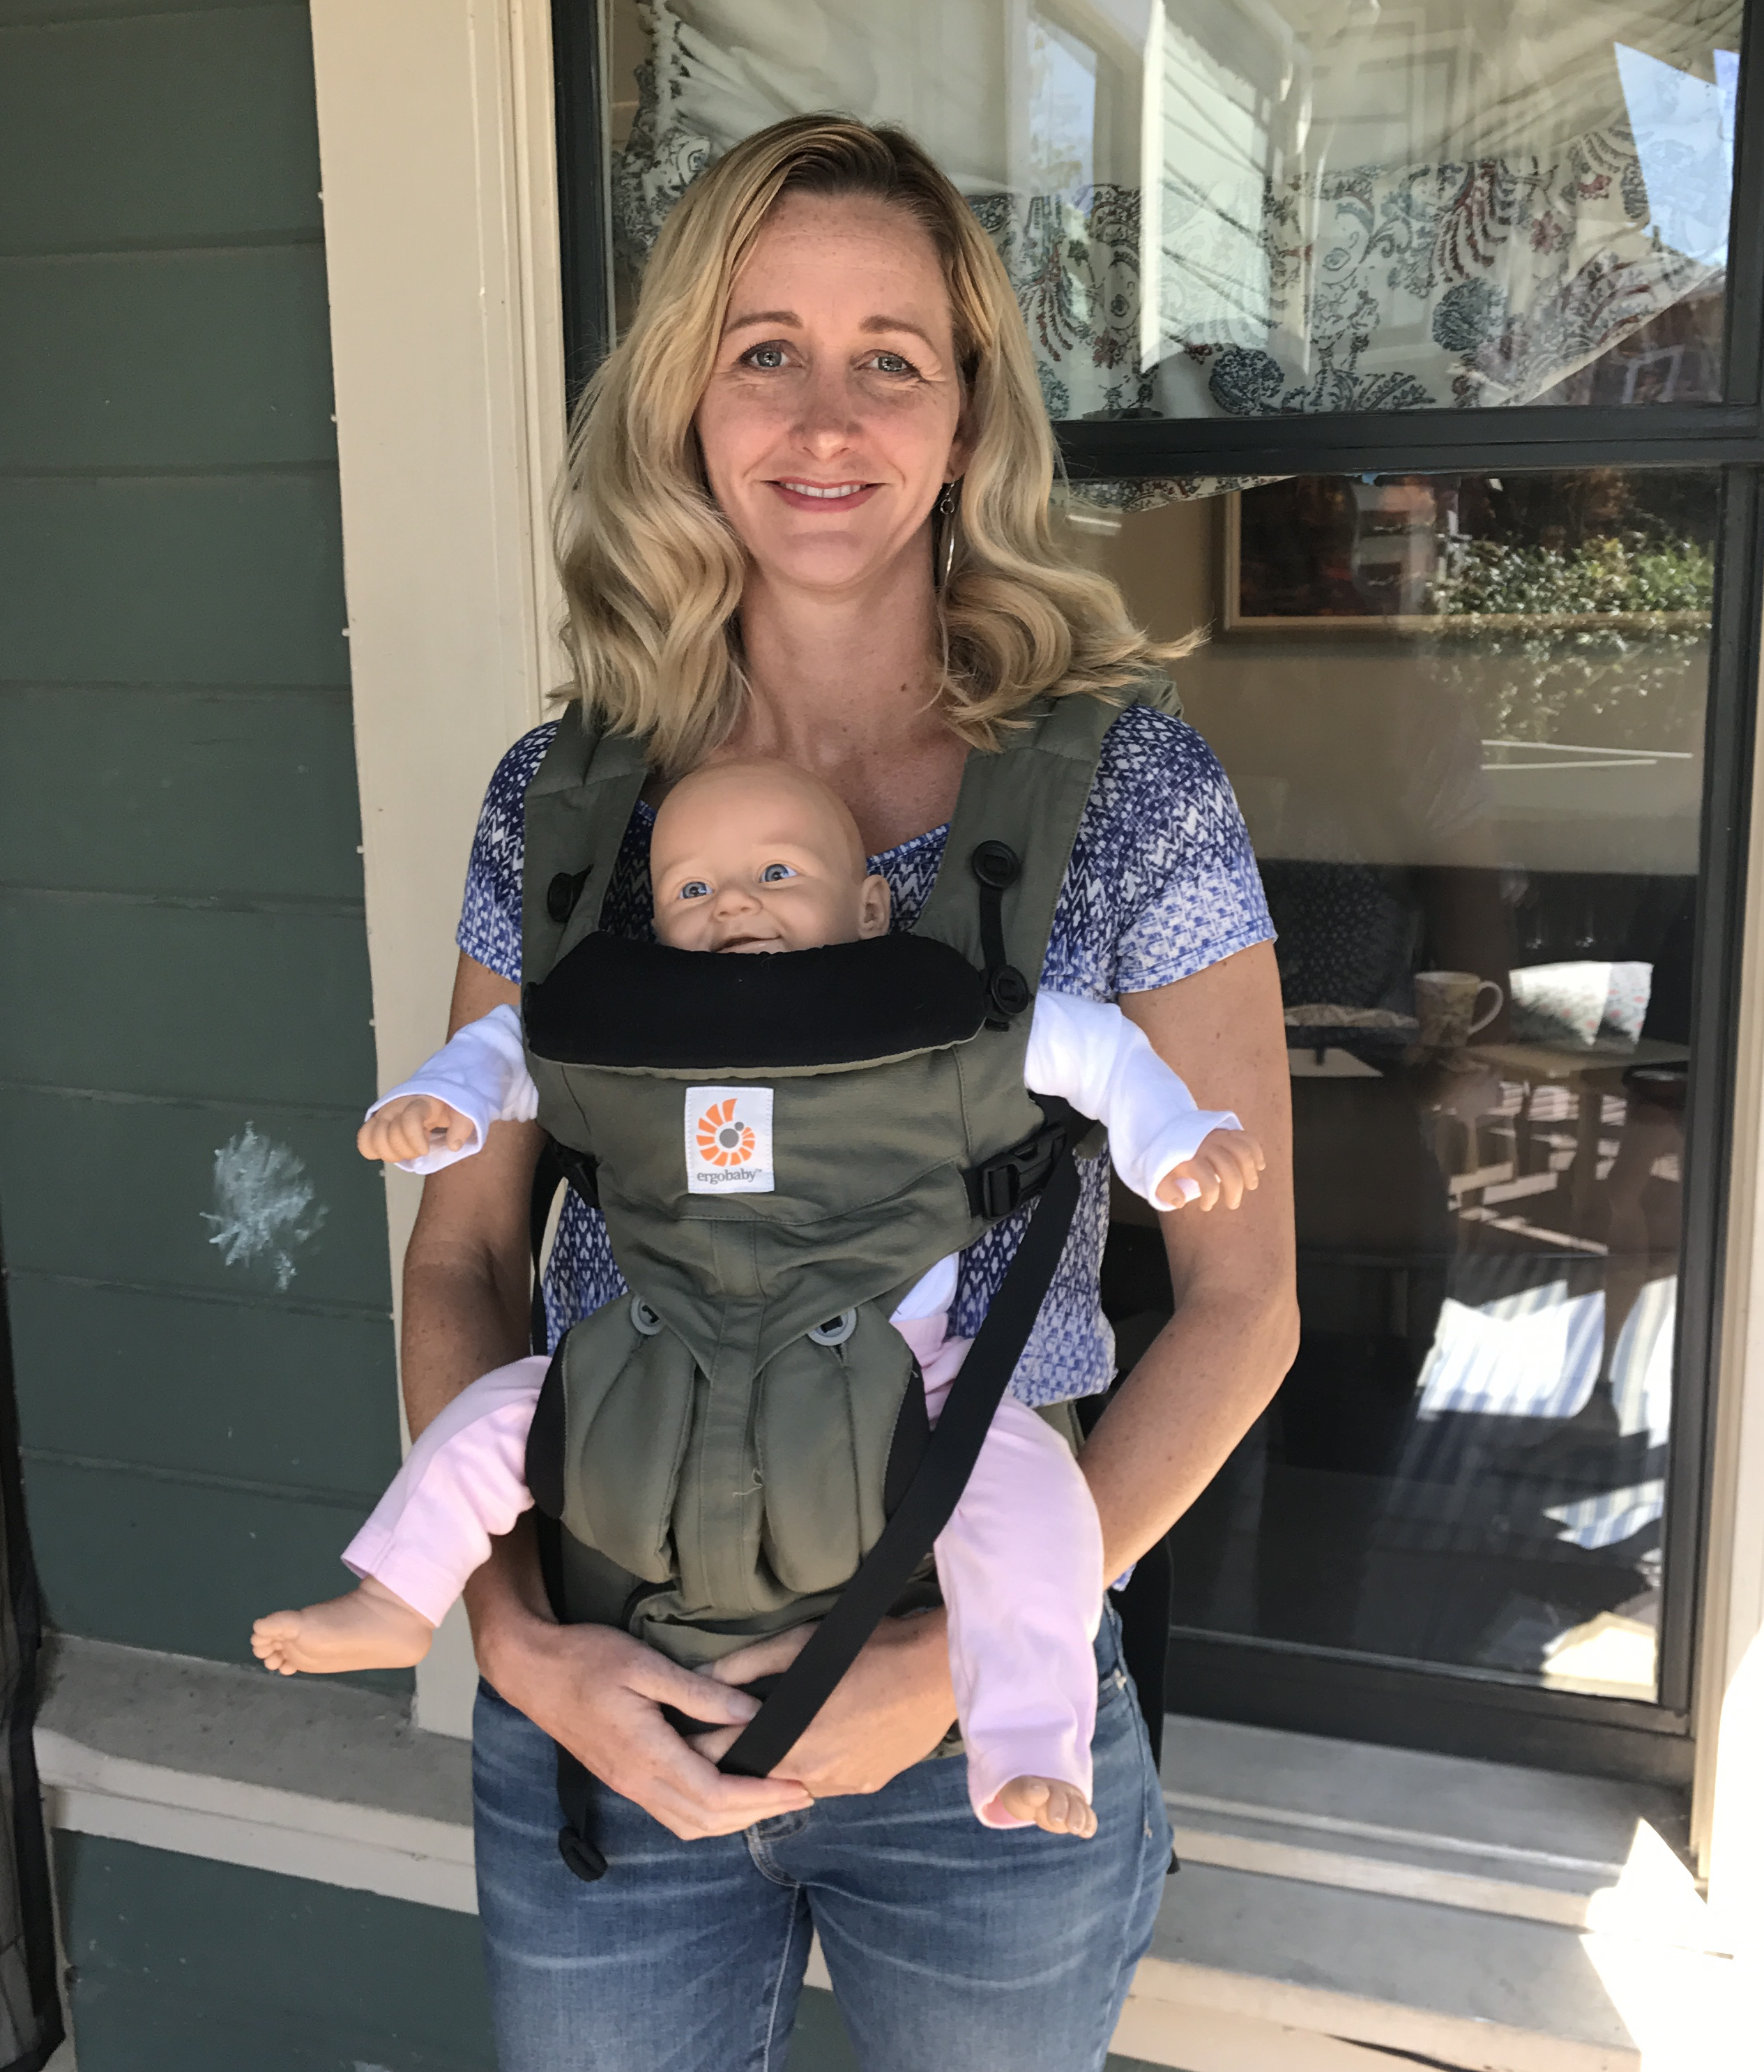 Ergobaby 360 Carrier Review